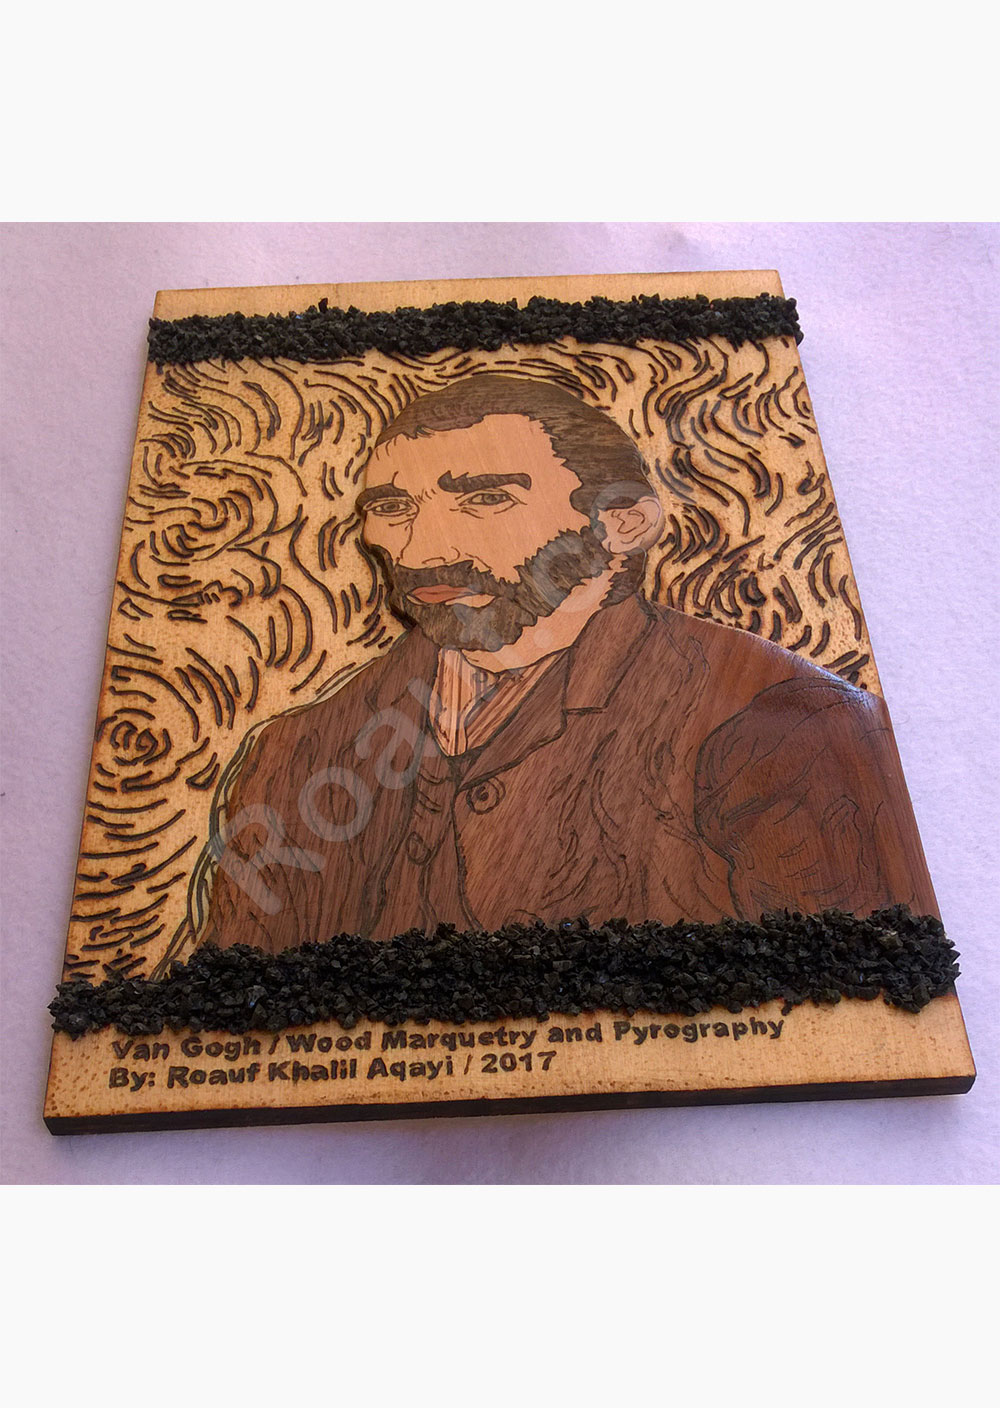 Wood Inlay, Wood Marquetry and Pyrography Panel of Van Gogh